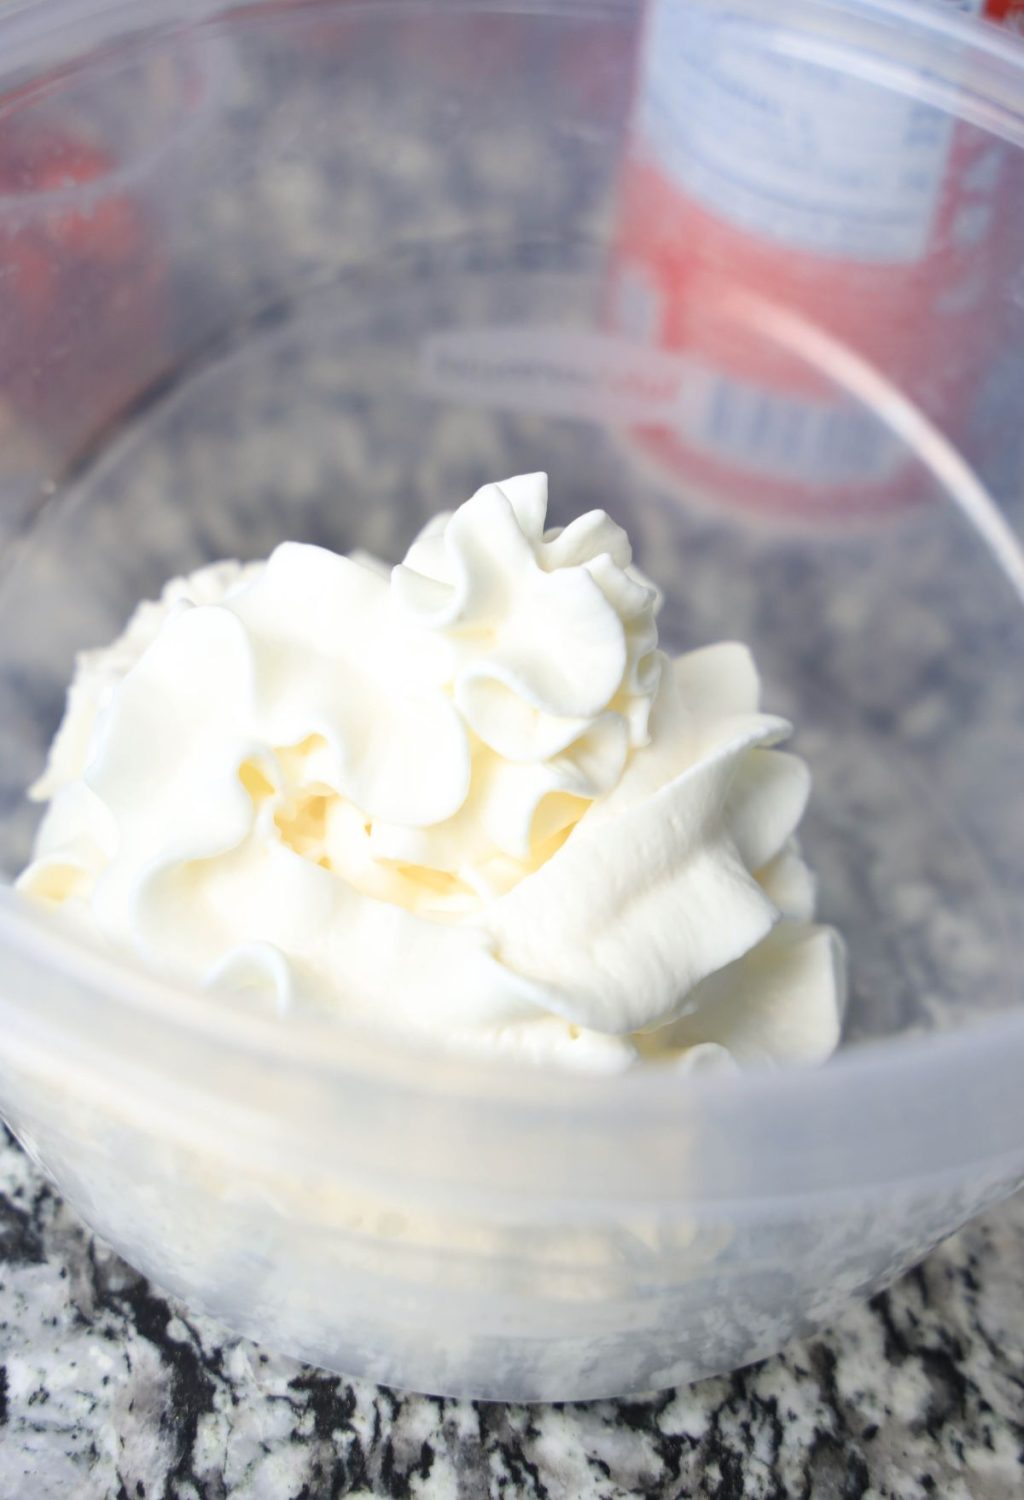 Whipped cream in a bowl on a counter.